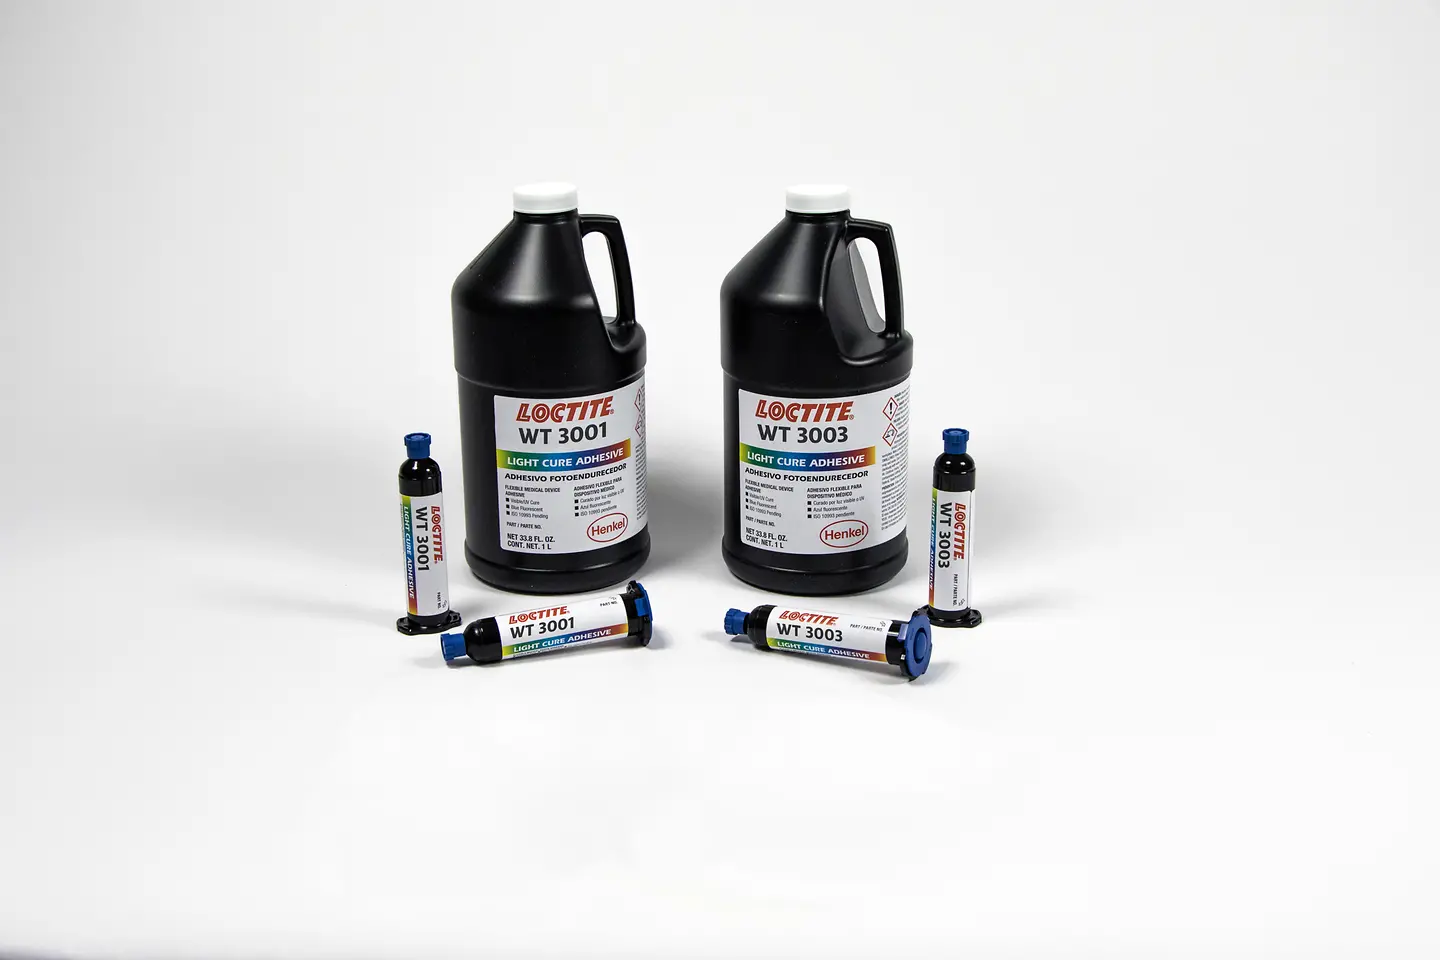 
Loctite light cure adhesives for housing, sealing and bonding applications